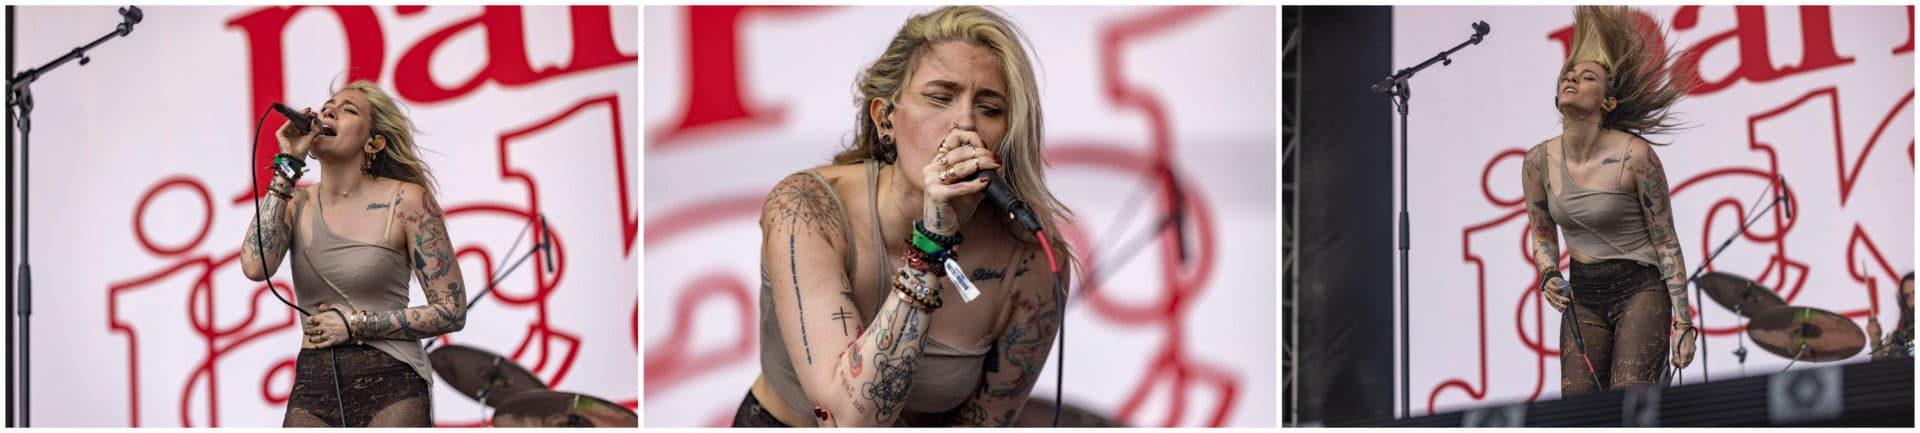 Paris Jackson was the first act to play at the Boston Calling Music Festival. (Jesse Costa/WBUR)